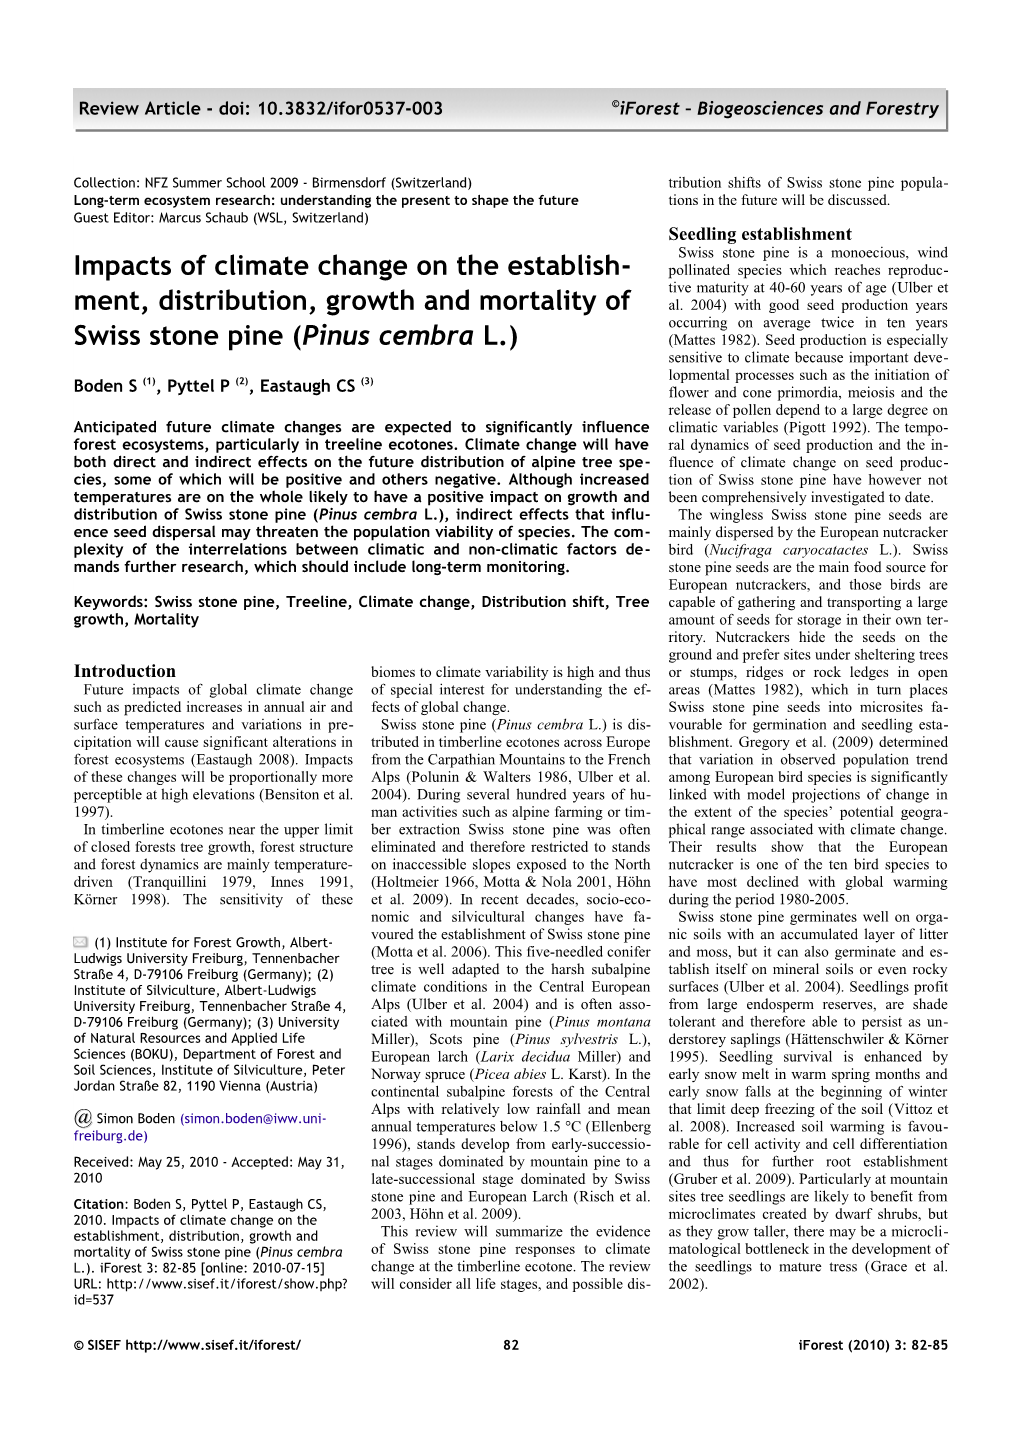 Impacts of Climate Change on the Establishment, Distribution, Growth